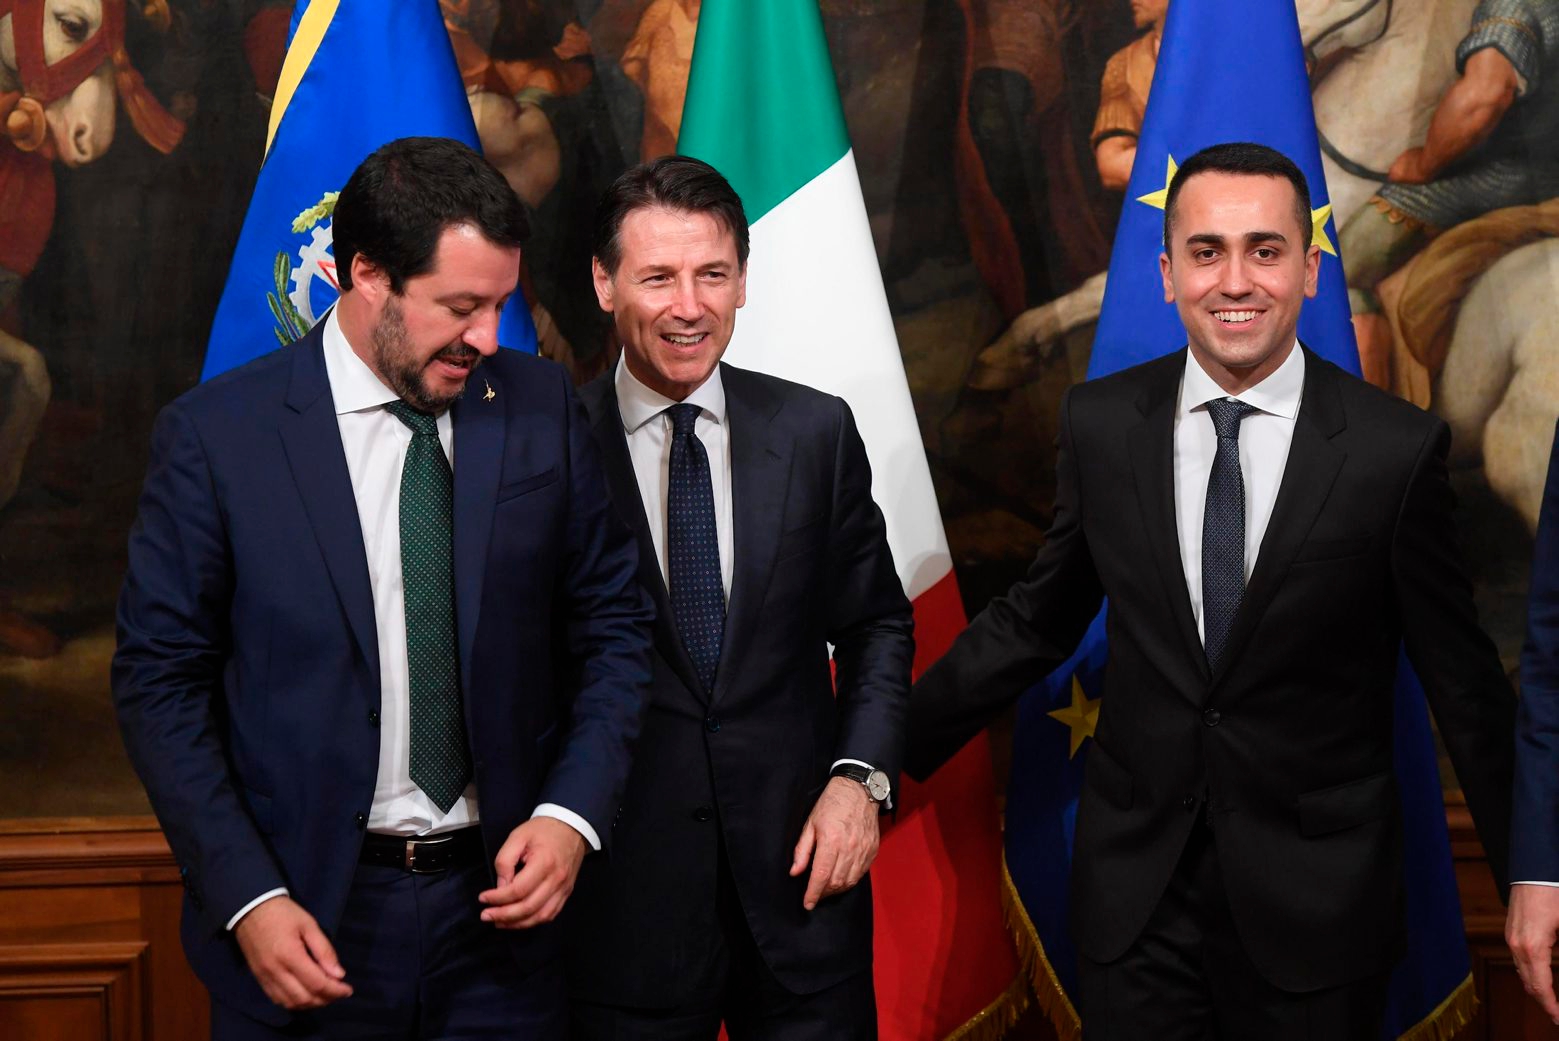 Italian Prime Minister Giuseppe Conte, center, poses with his vice Prime Ministers Luigi Di Maio, right, and Matteo Salvini, after receiving from the outgoing Prime Minister Paolo Gentiloni the small silver bell used to open the First Council of Minister at Chigi Palace in Rome, Friday, June 1, 2018. (Claudio Peri/ANSA via AP) Italy Politics